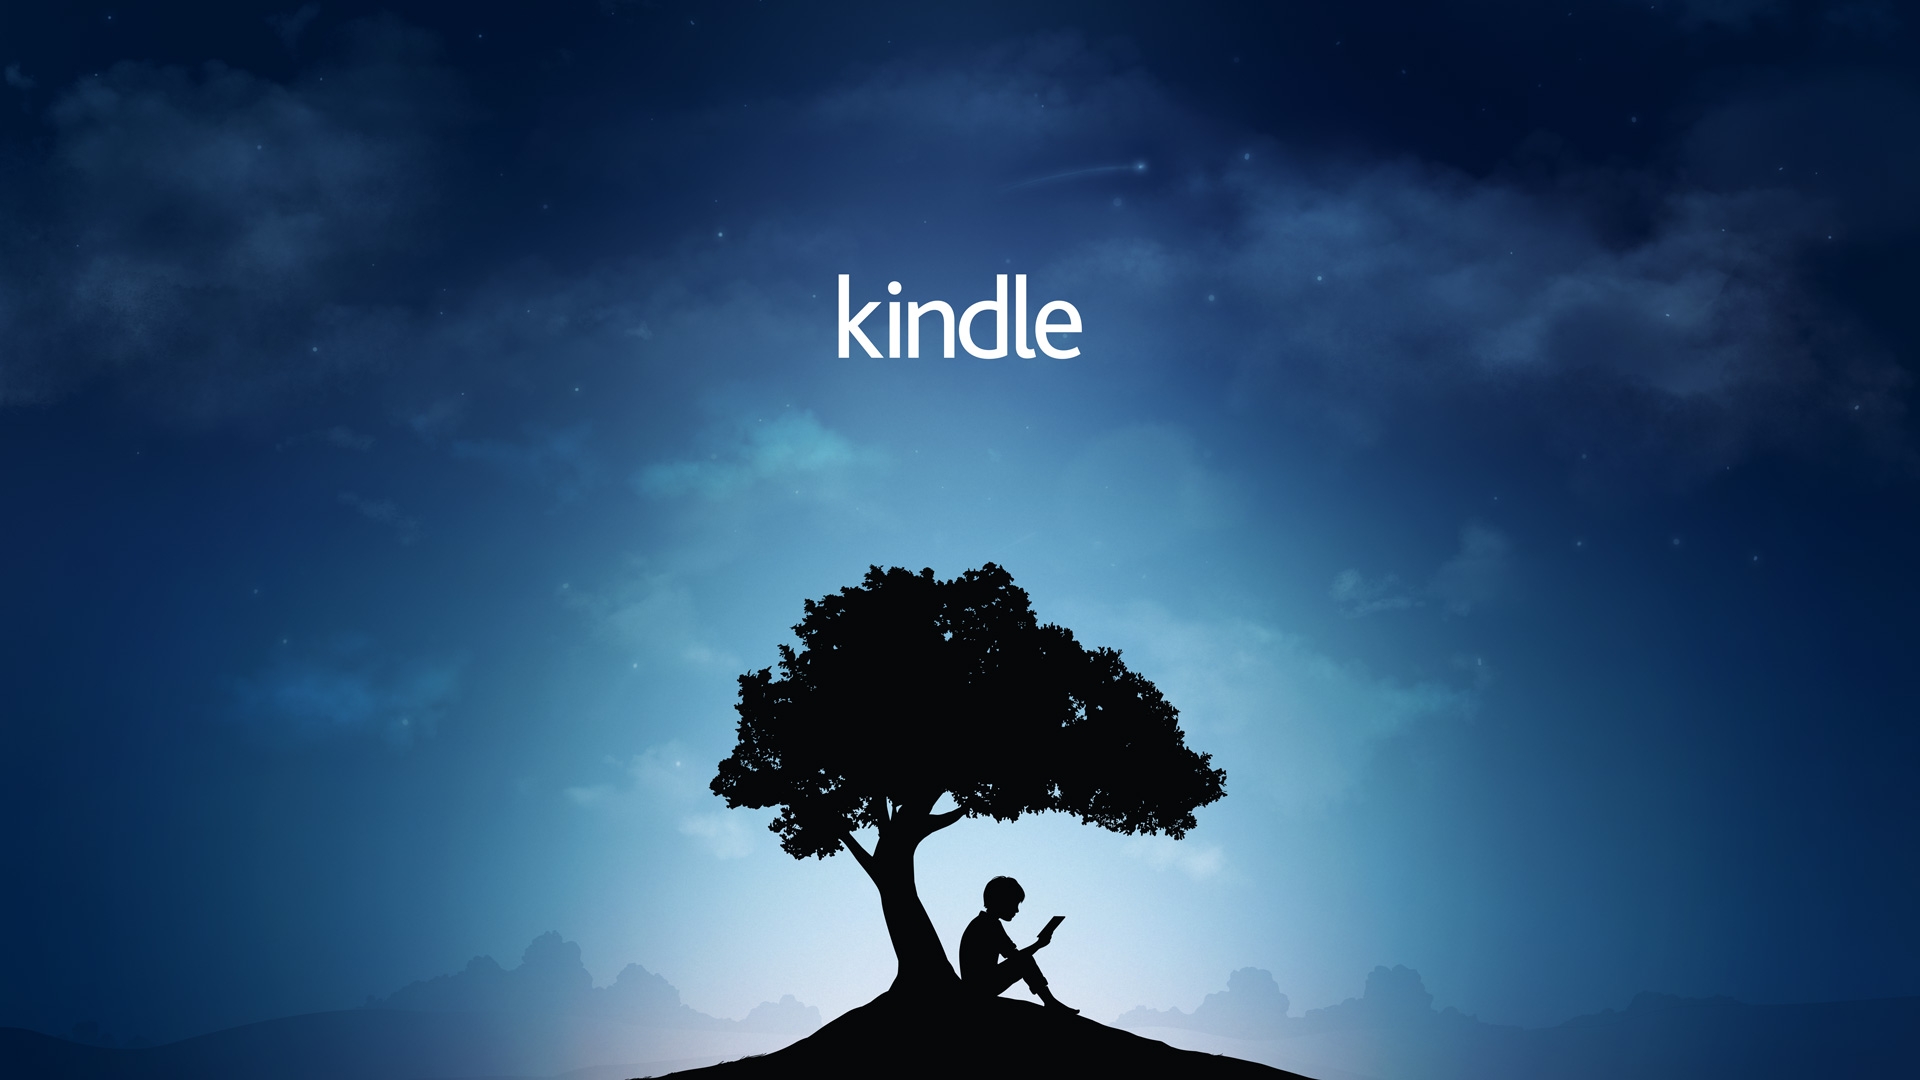 In this article, we are going to go over how to buy Kindle book on iPhone, so you can enjoy your favorite books where ever you go.